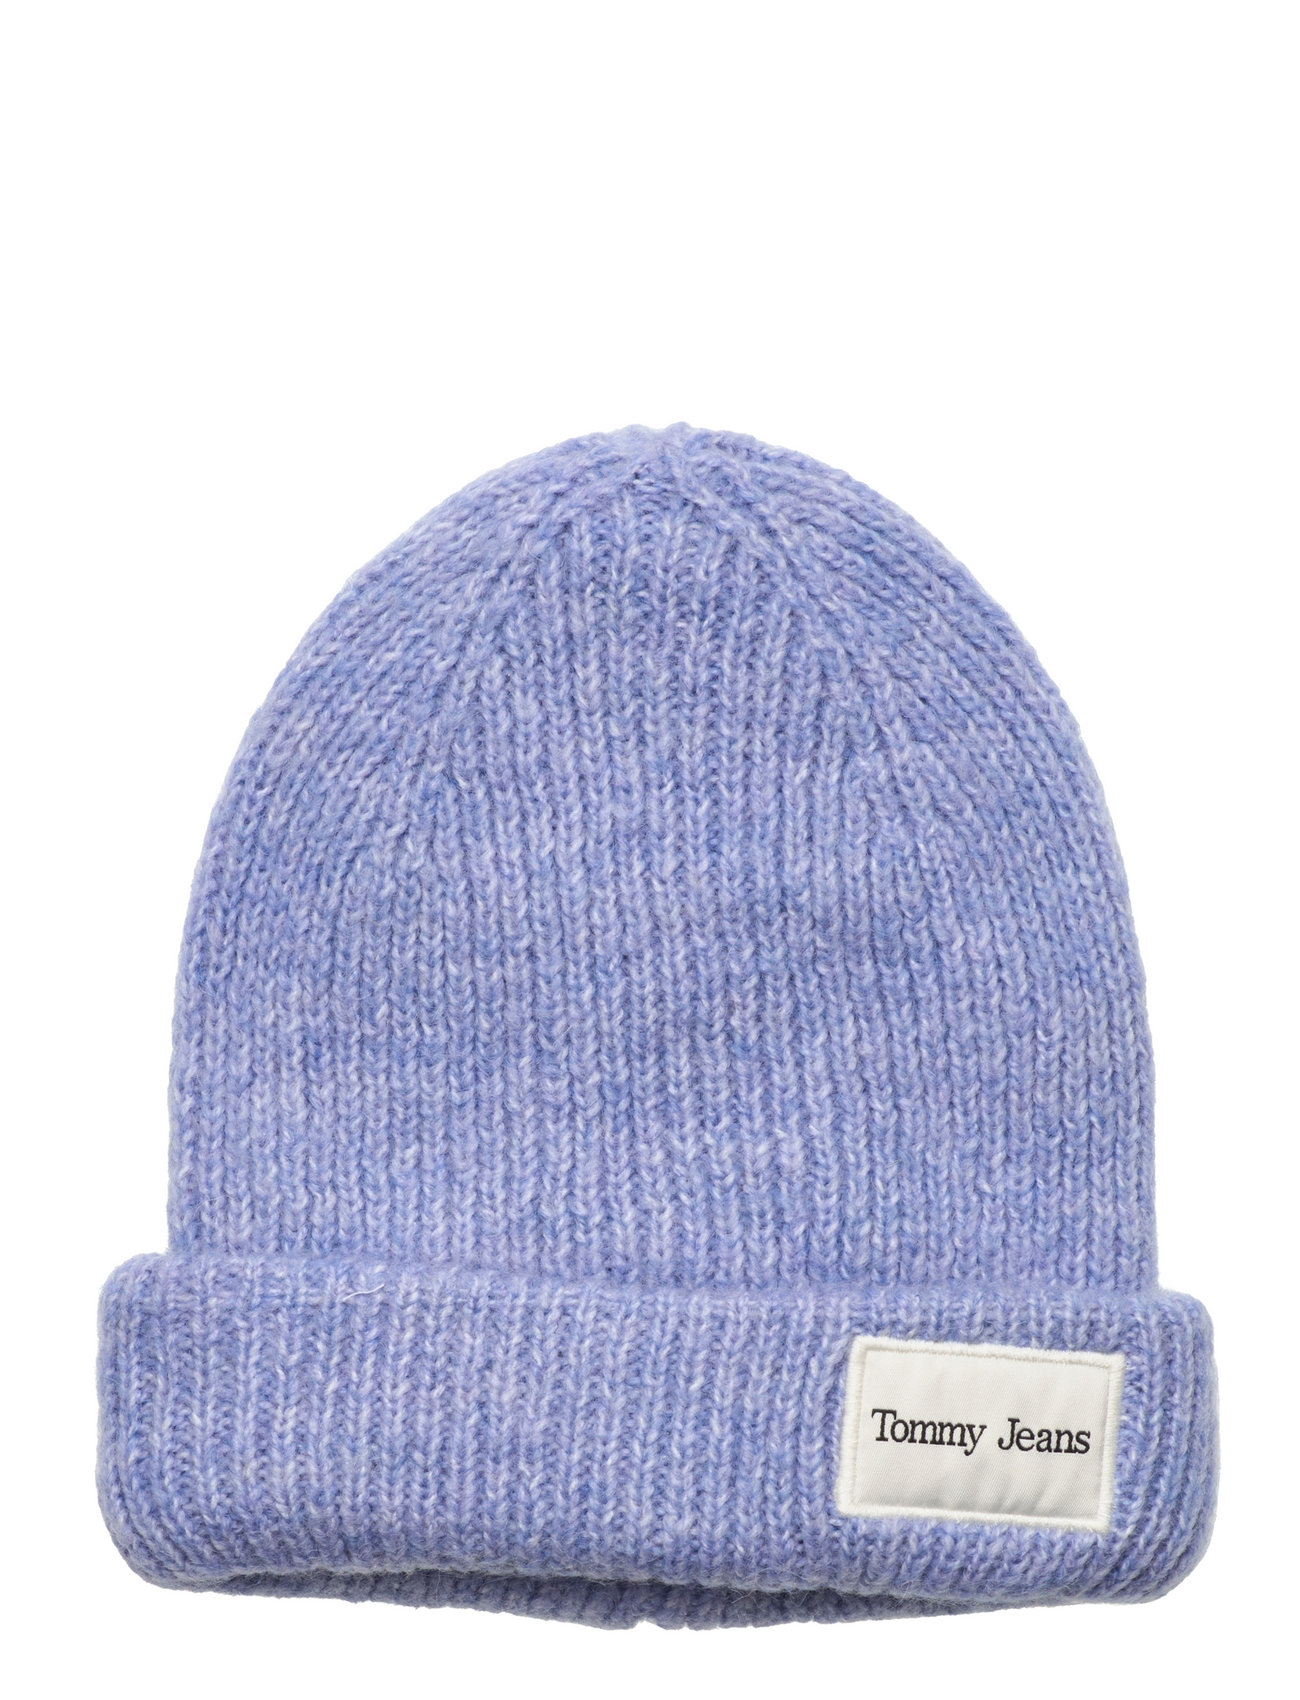 - Hats Tommy Sport Elevated Tjw Hilfiger Beanie